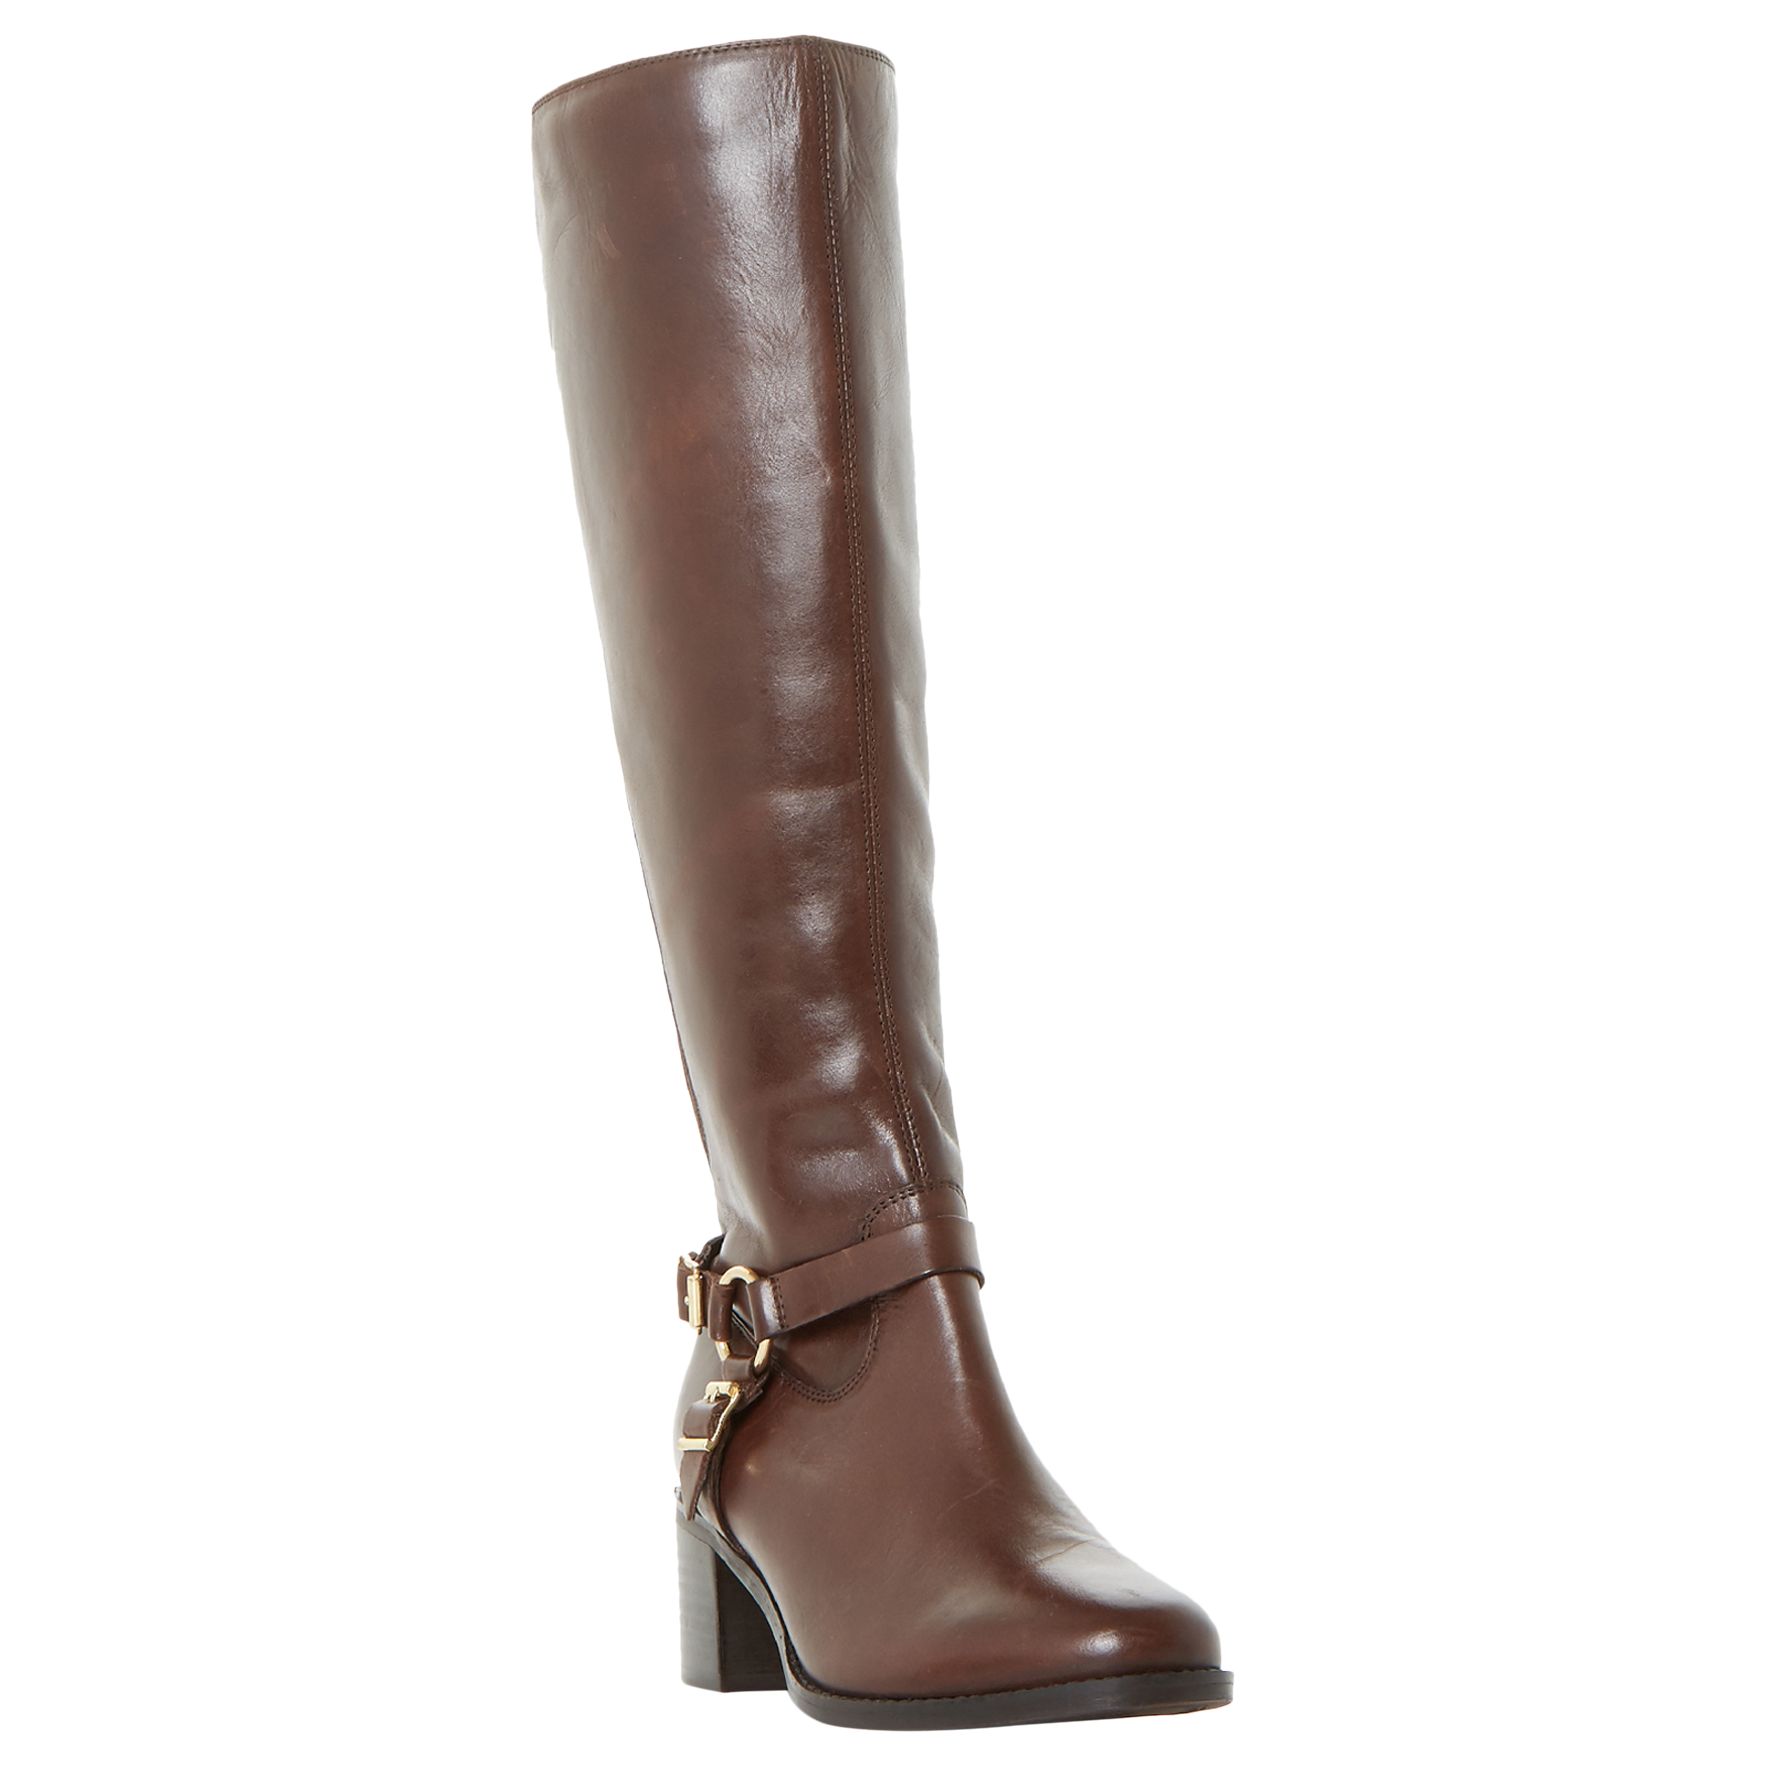 Dune Vicky Block Heeled Knee High Boots, Brown, 3